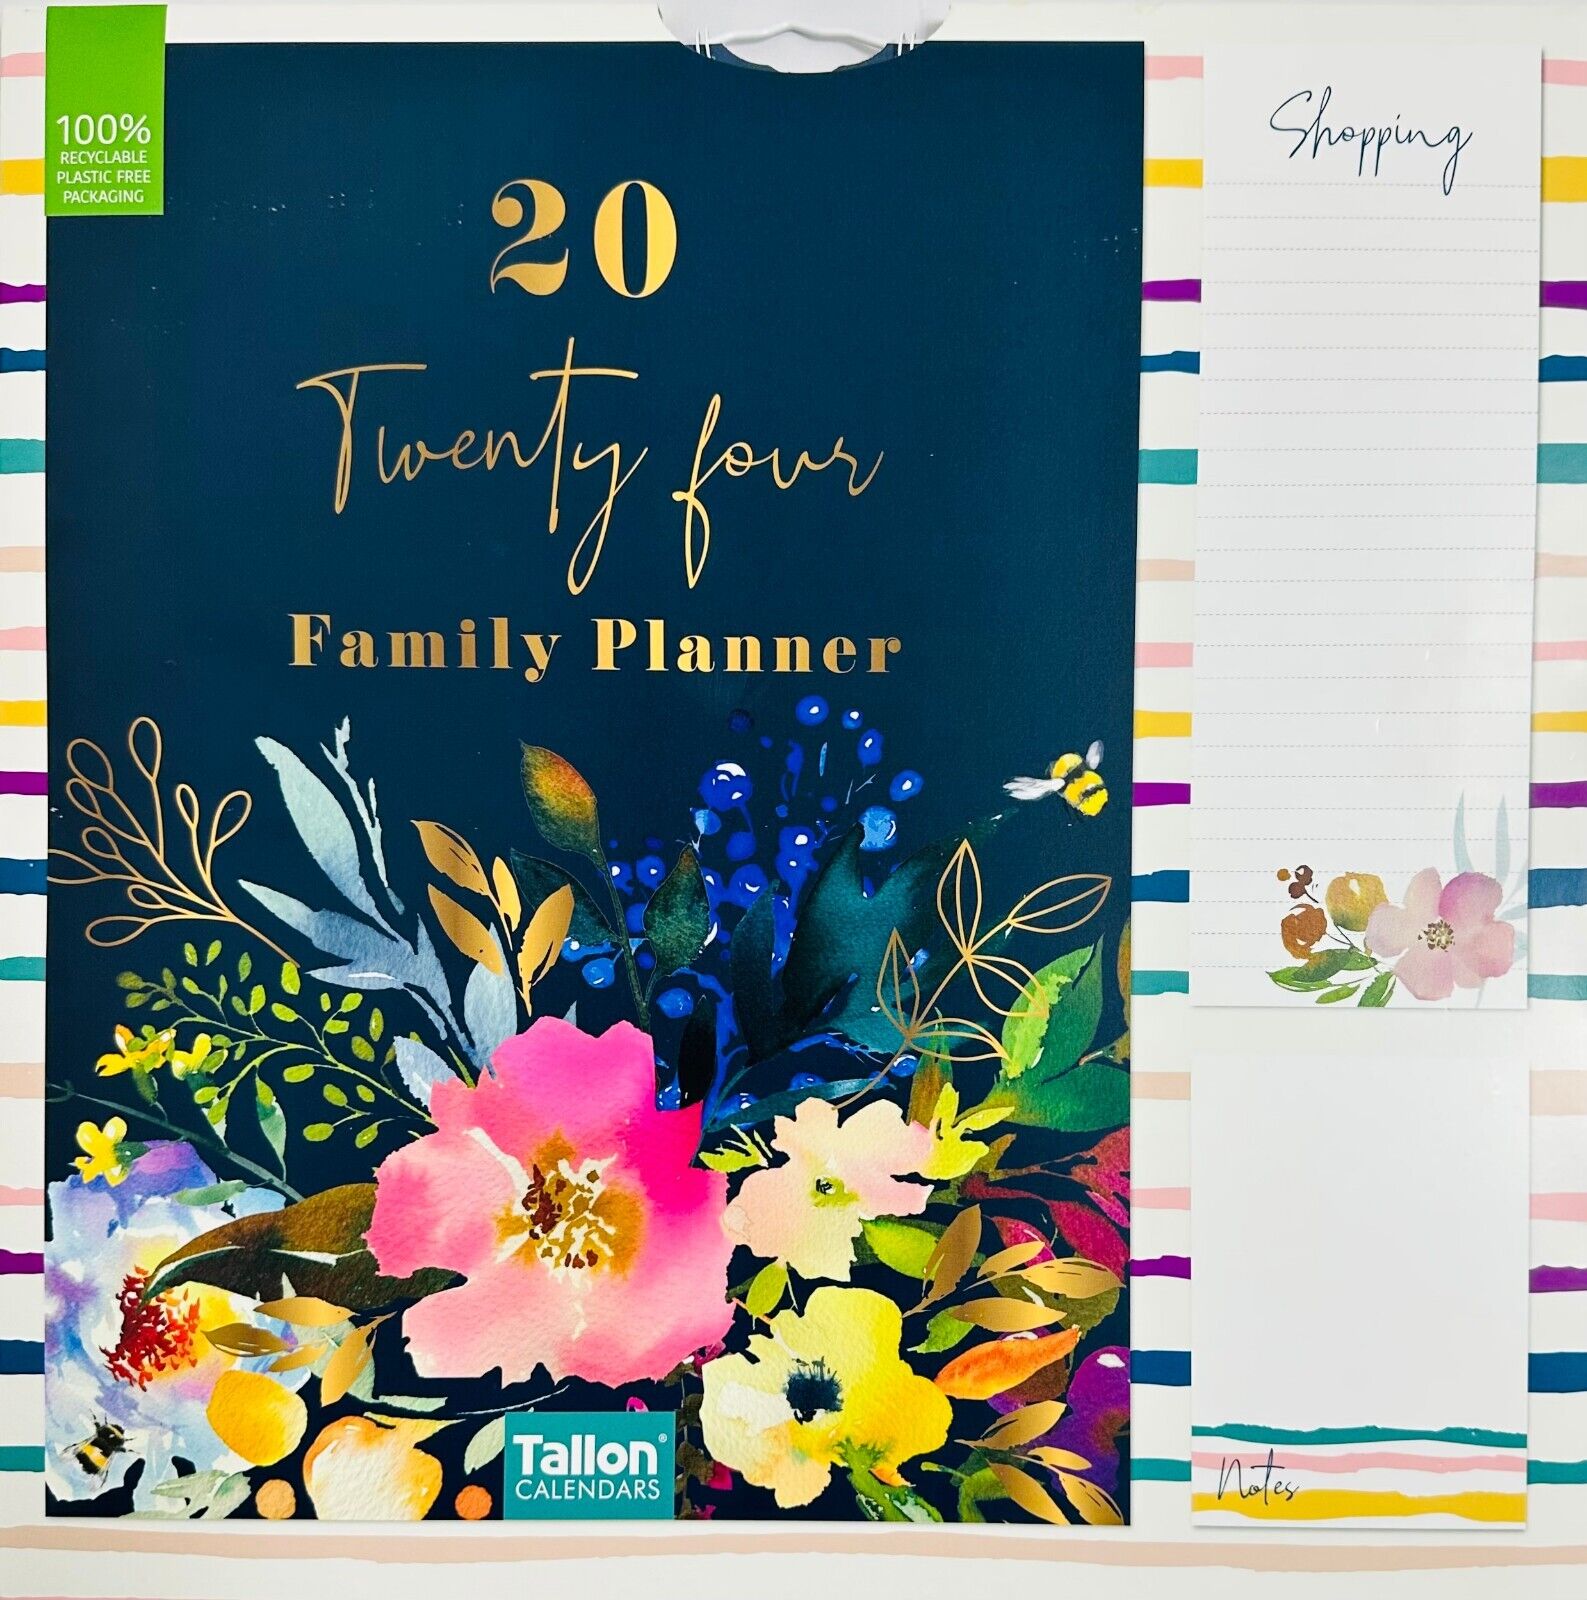 Beclen Harp 2024 Month To View/MTV Family Organiser 5 Columns Calendar Planner With Shopping Note Pad